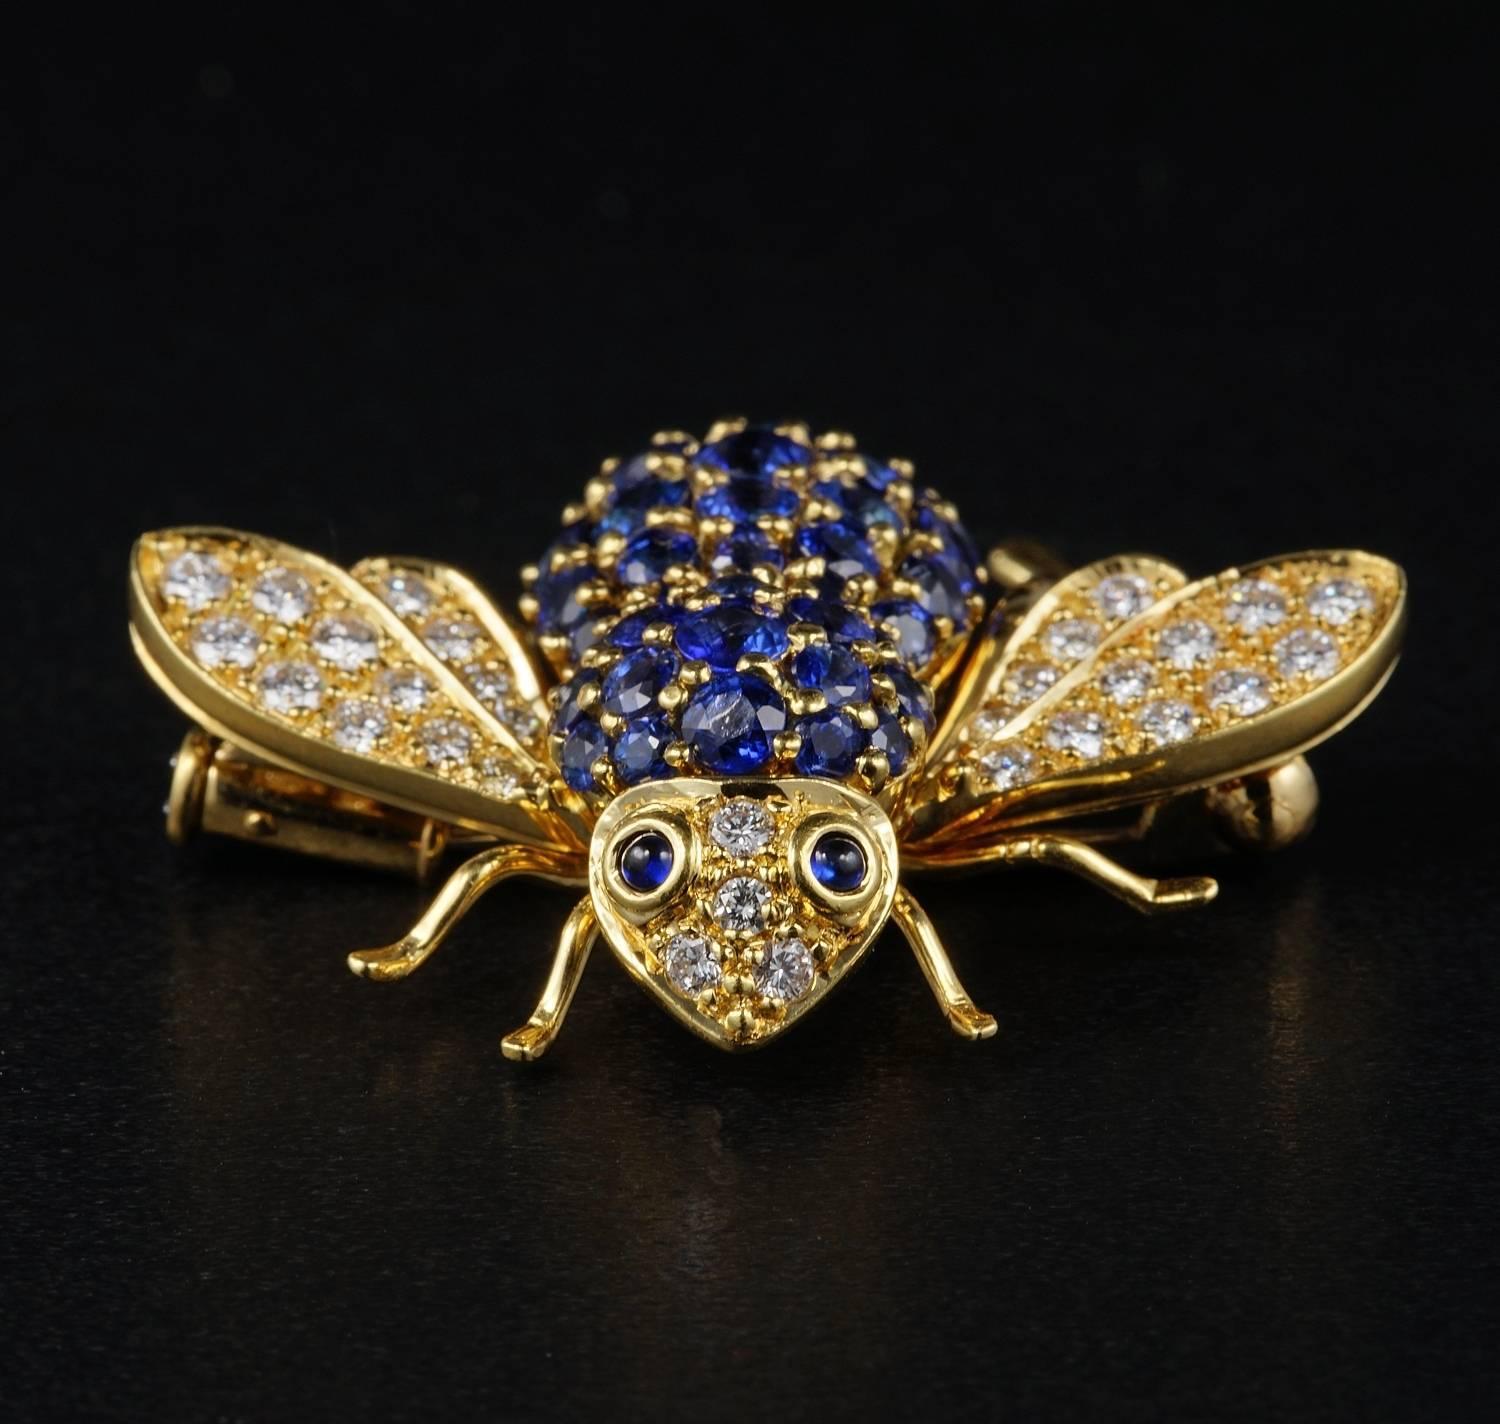 Simply divine vintage example of Bumble Bee, 1950 ca italian origin
The gorgeous fat body is fully enhanced with tons of Natural Sapphires of stunning Corn Flower colour hue. 3.0 Ct approx in total giving life to the bee and immensity of